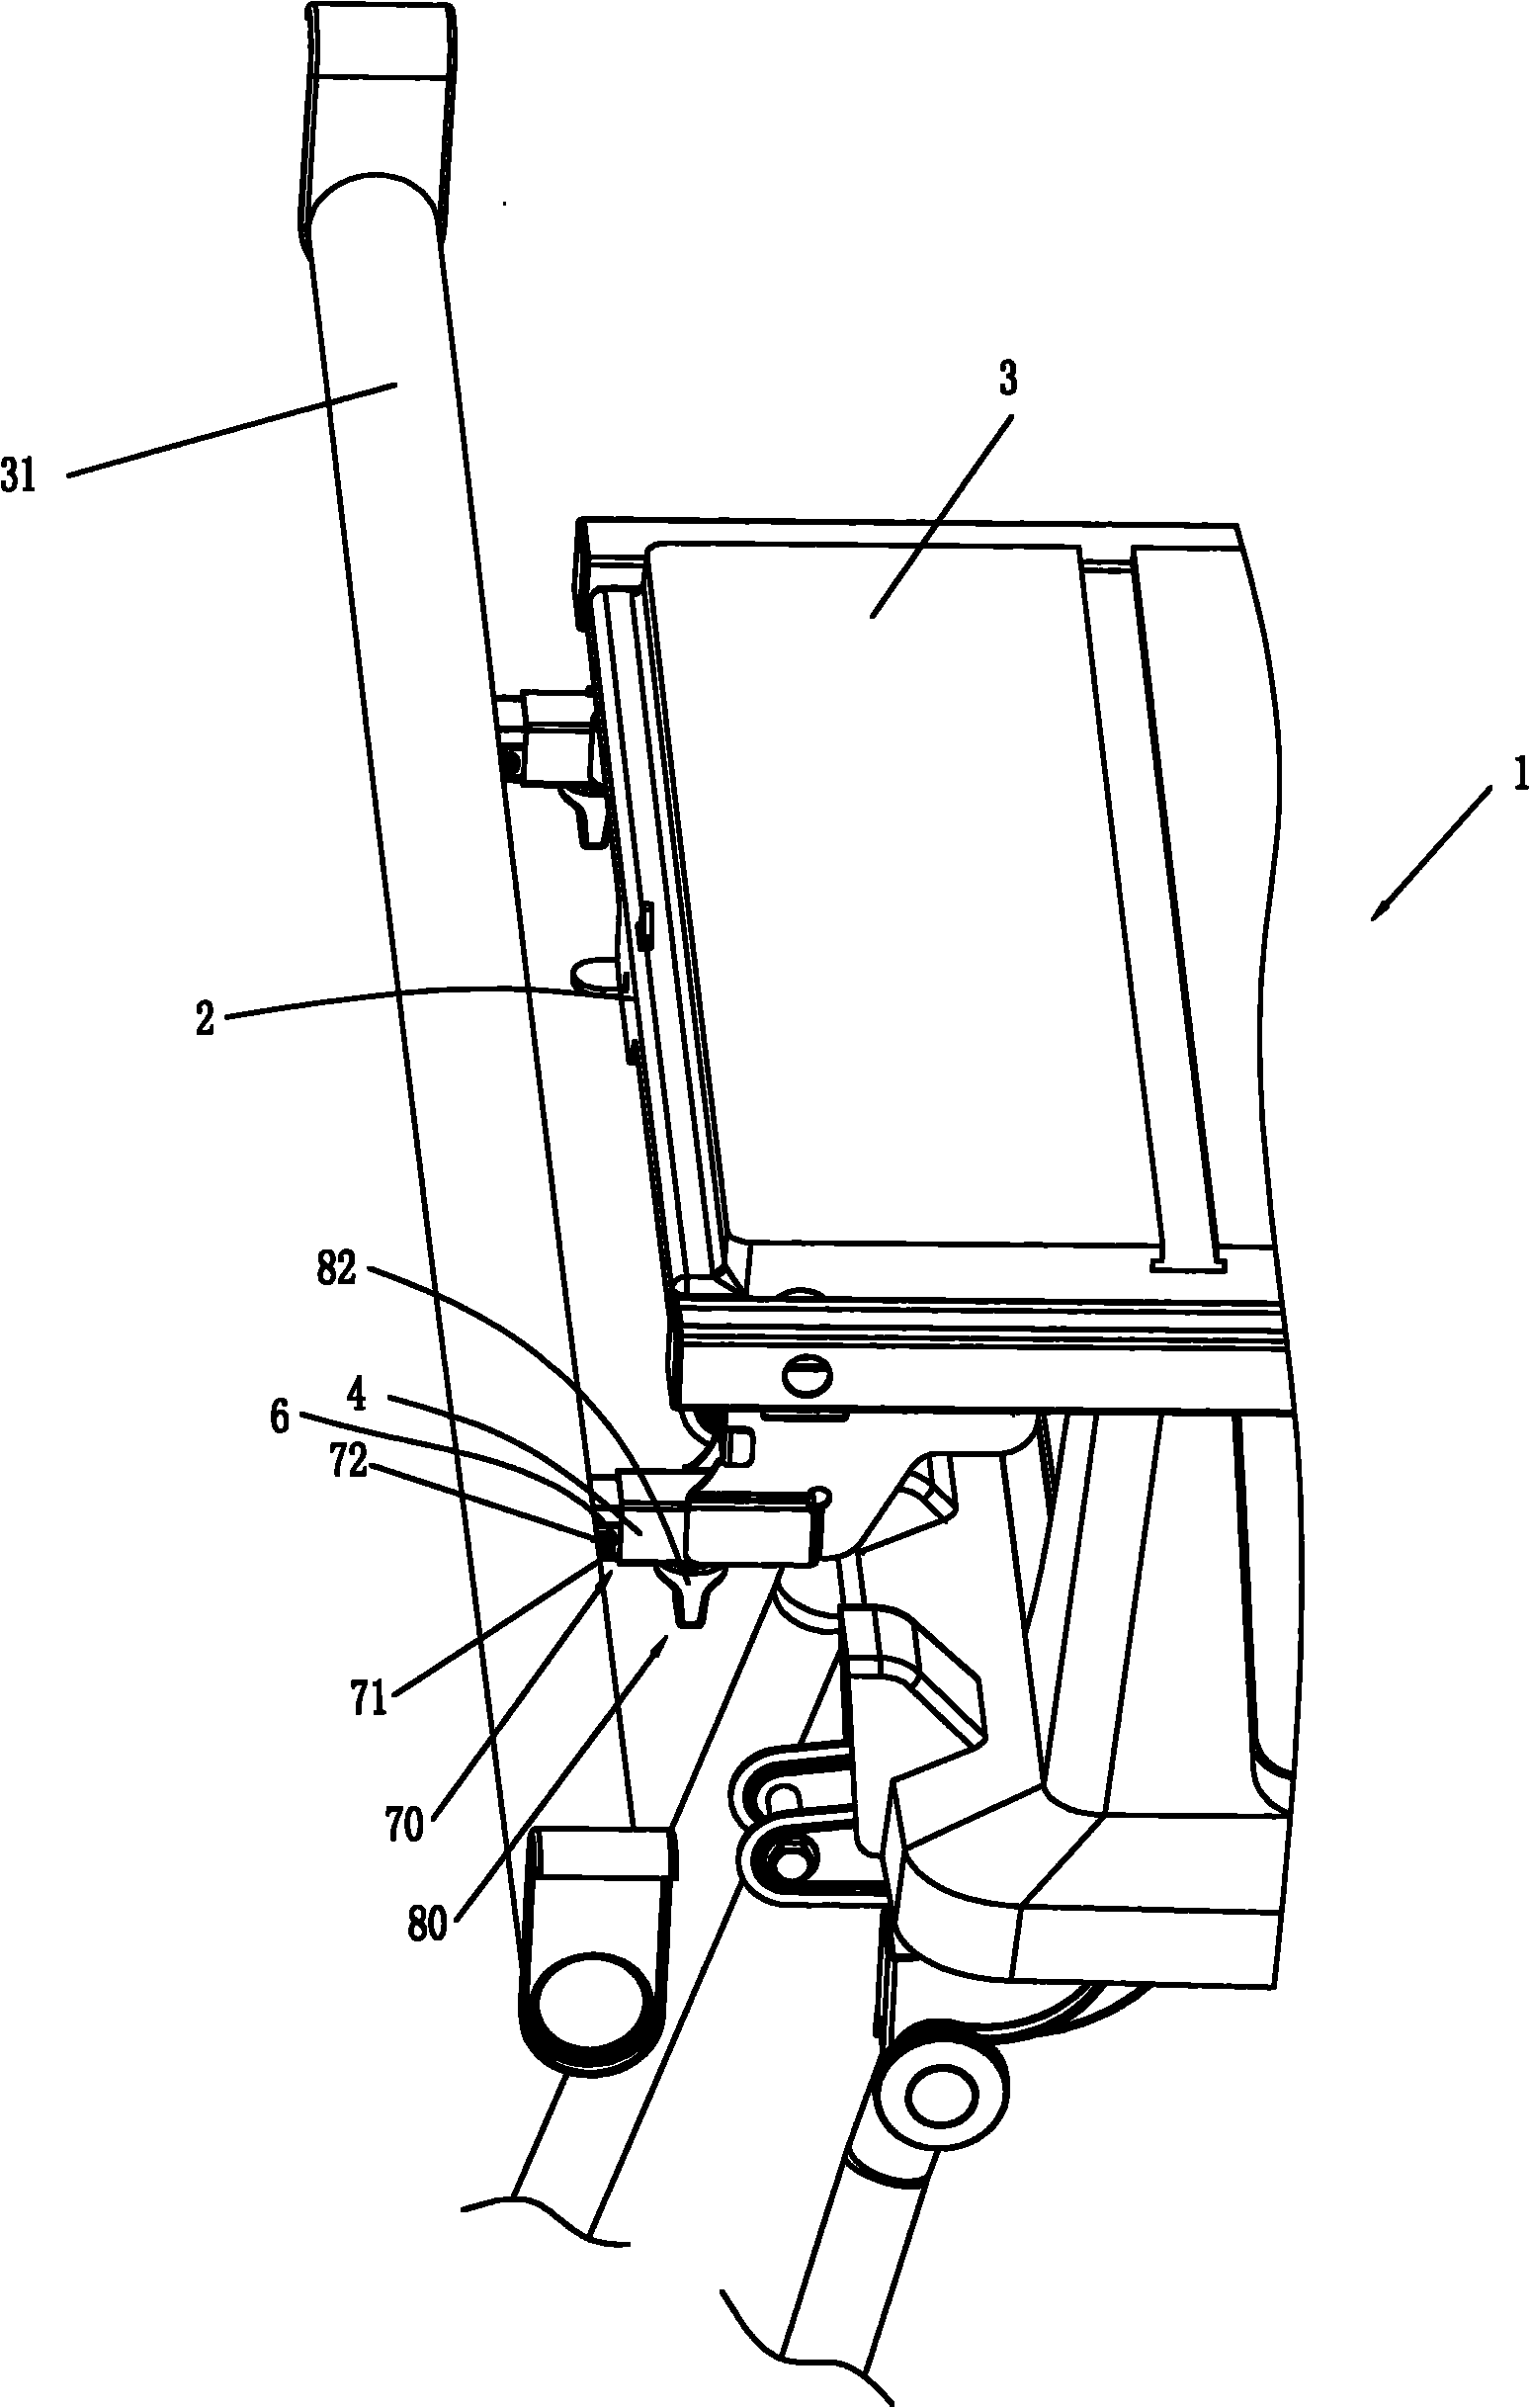 Auxiliary support device